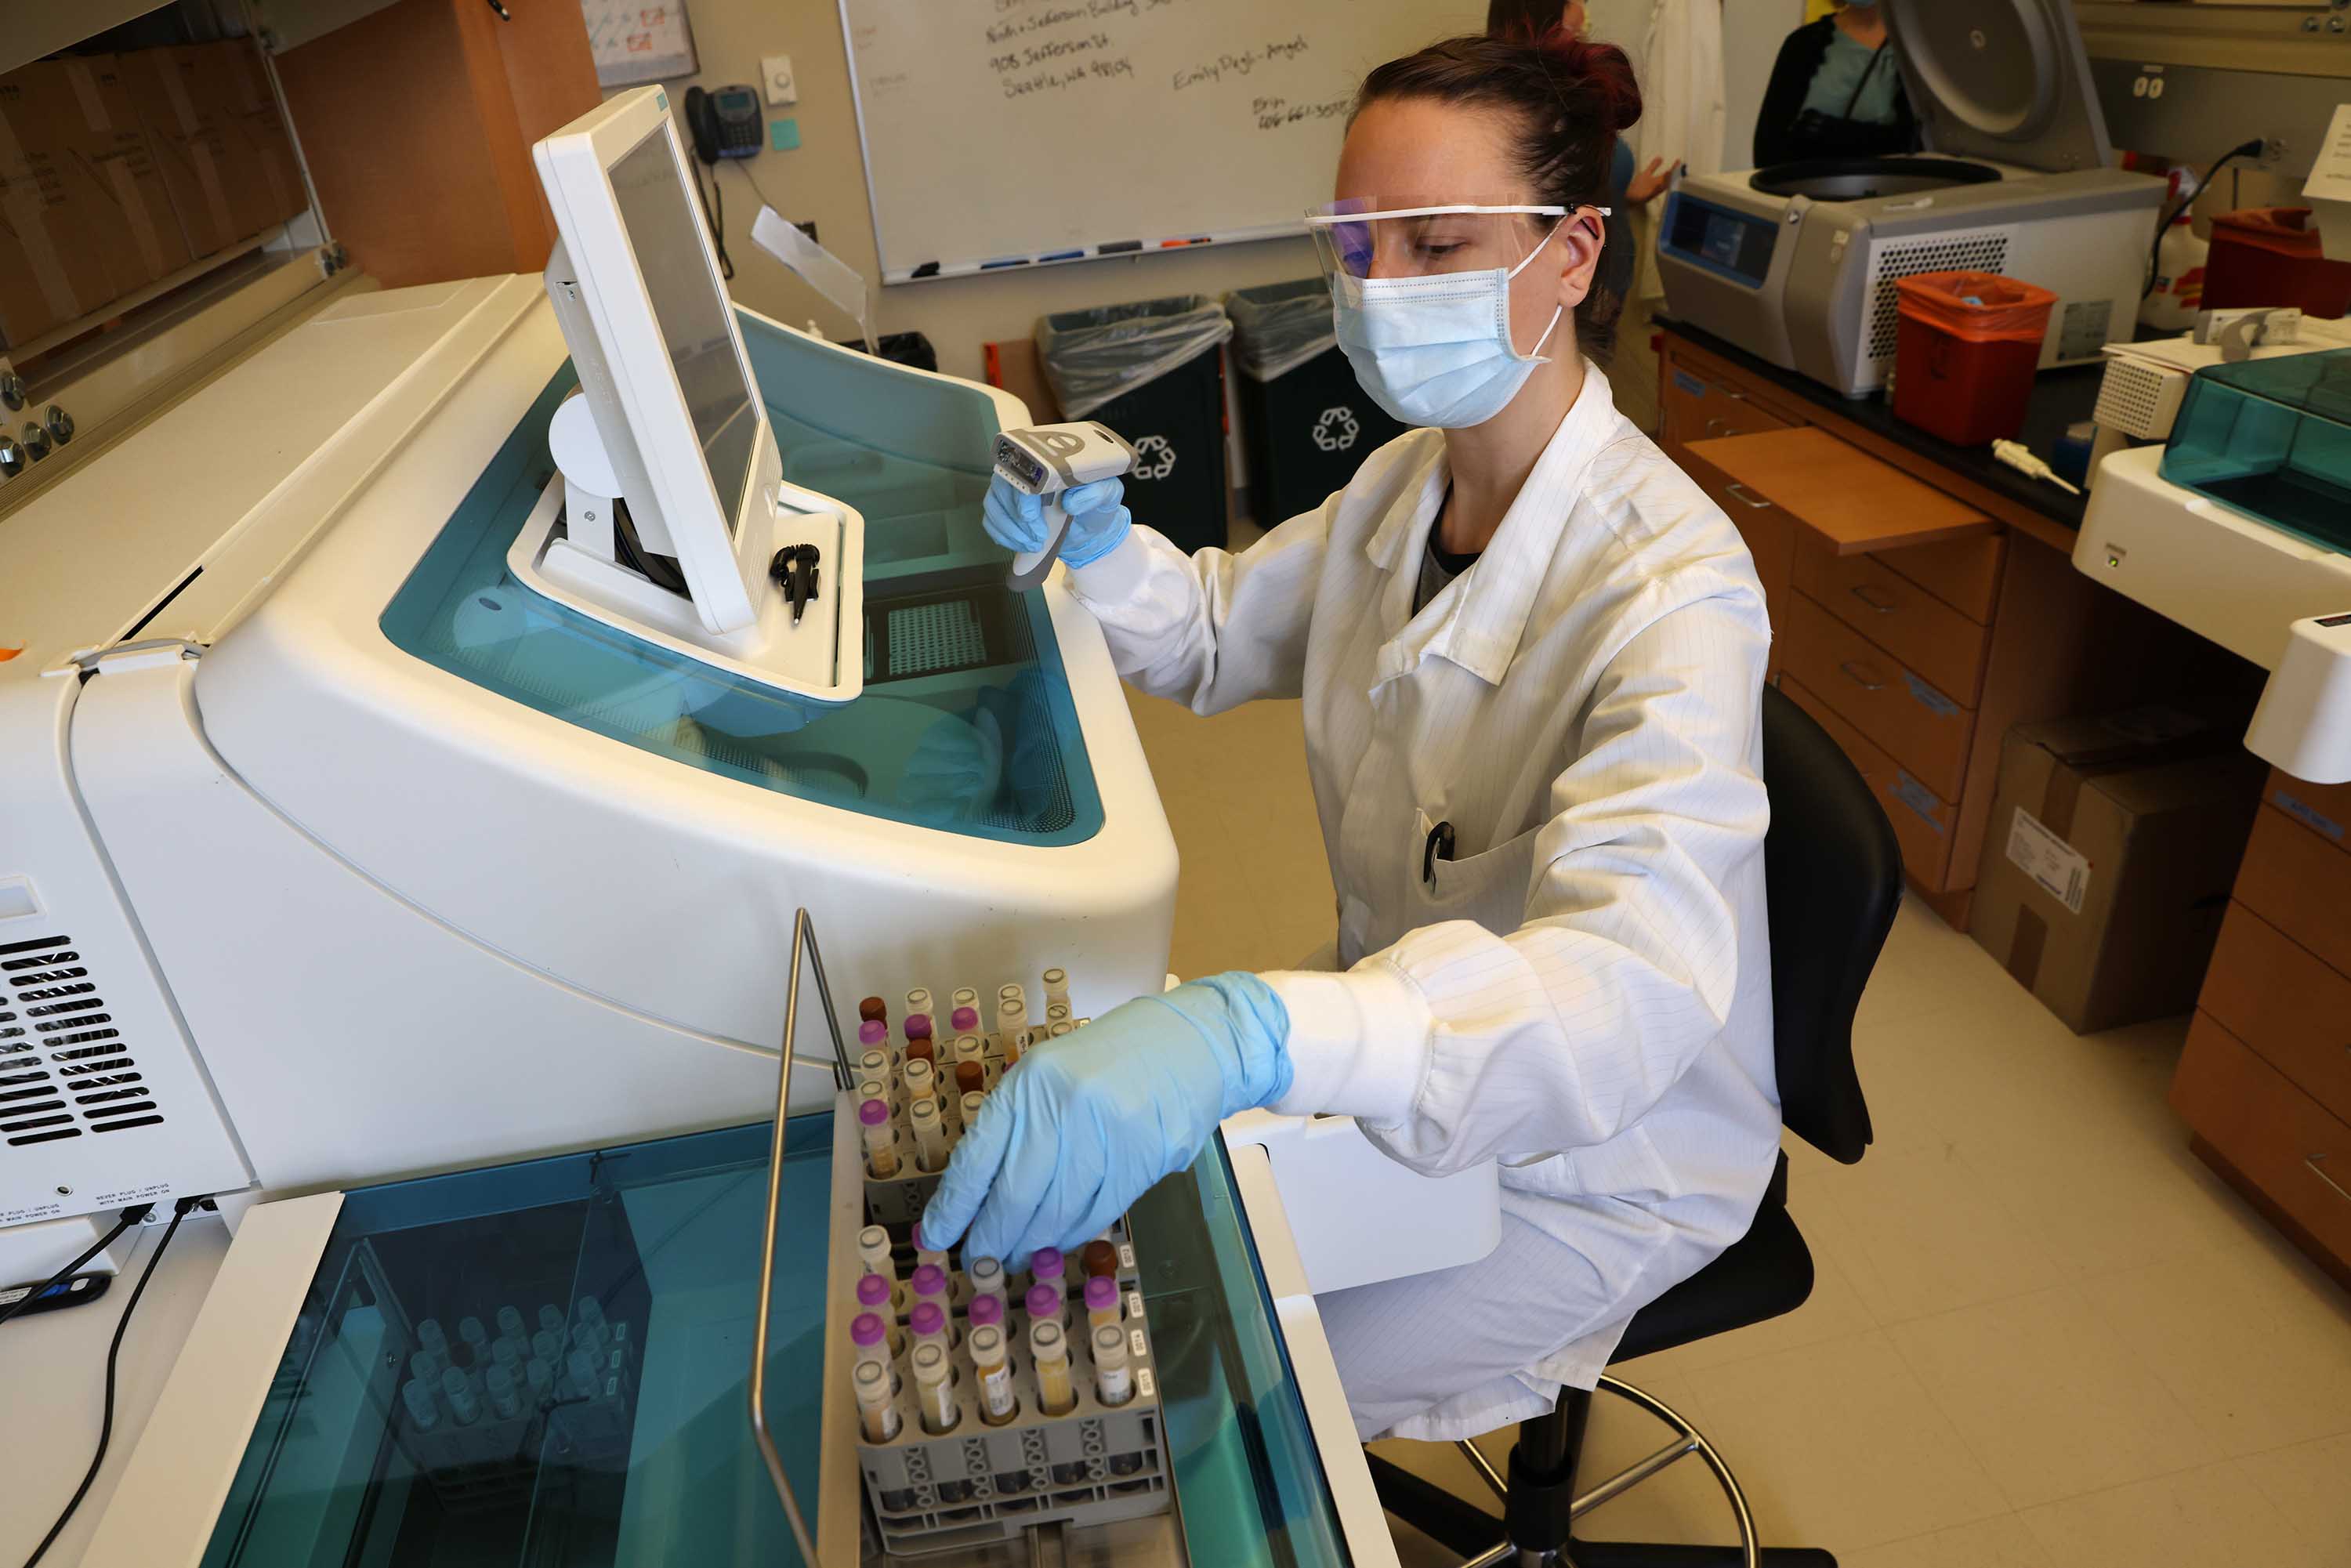 Medical laboratory scientist Anielia Sobel tests samples from the Novavax Phase 3 Covid-19 clinical vaccine trial at the UW Medicine Retrovirology Lab in Seattle, Washington, on February 12.